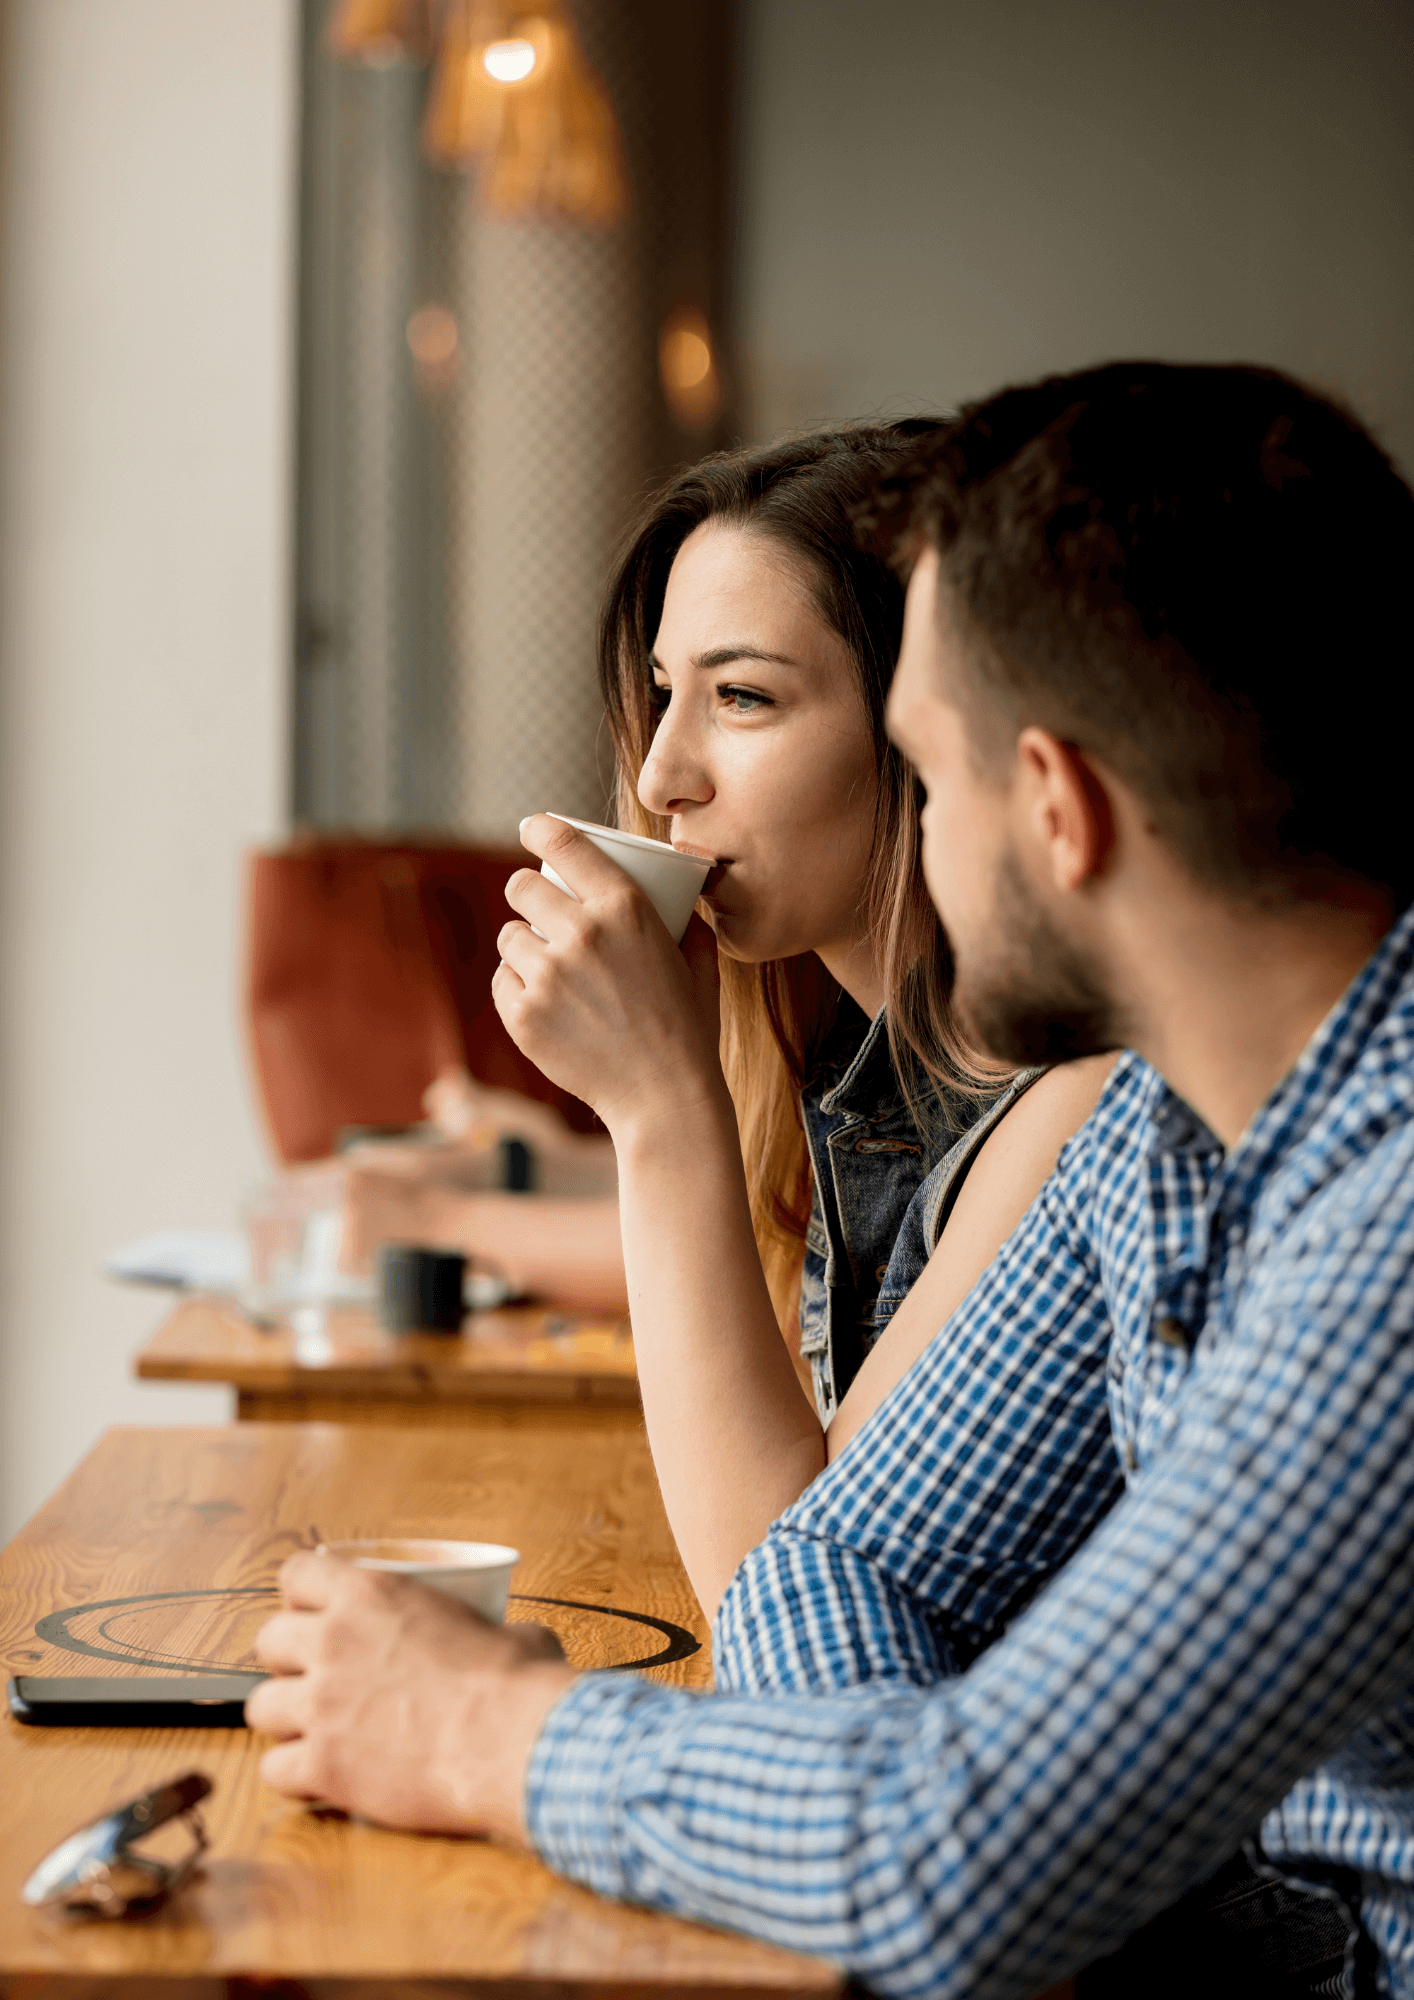 A white woman and man sitting together and drinking coffee